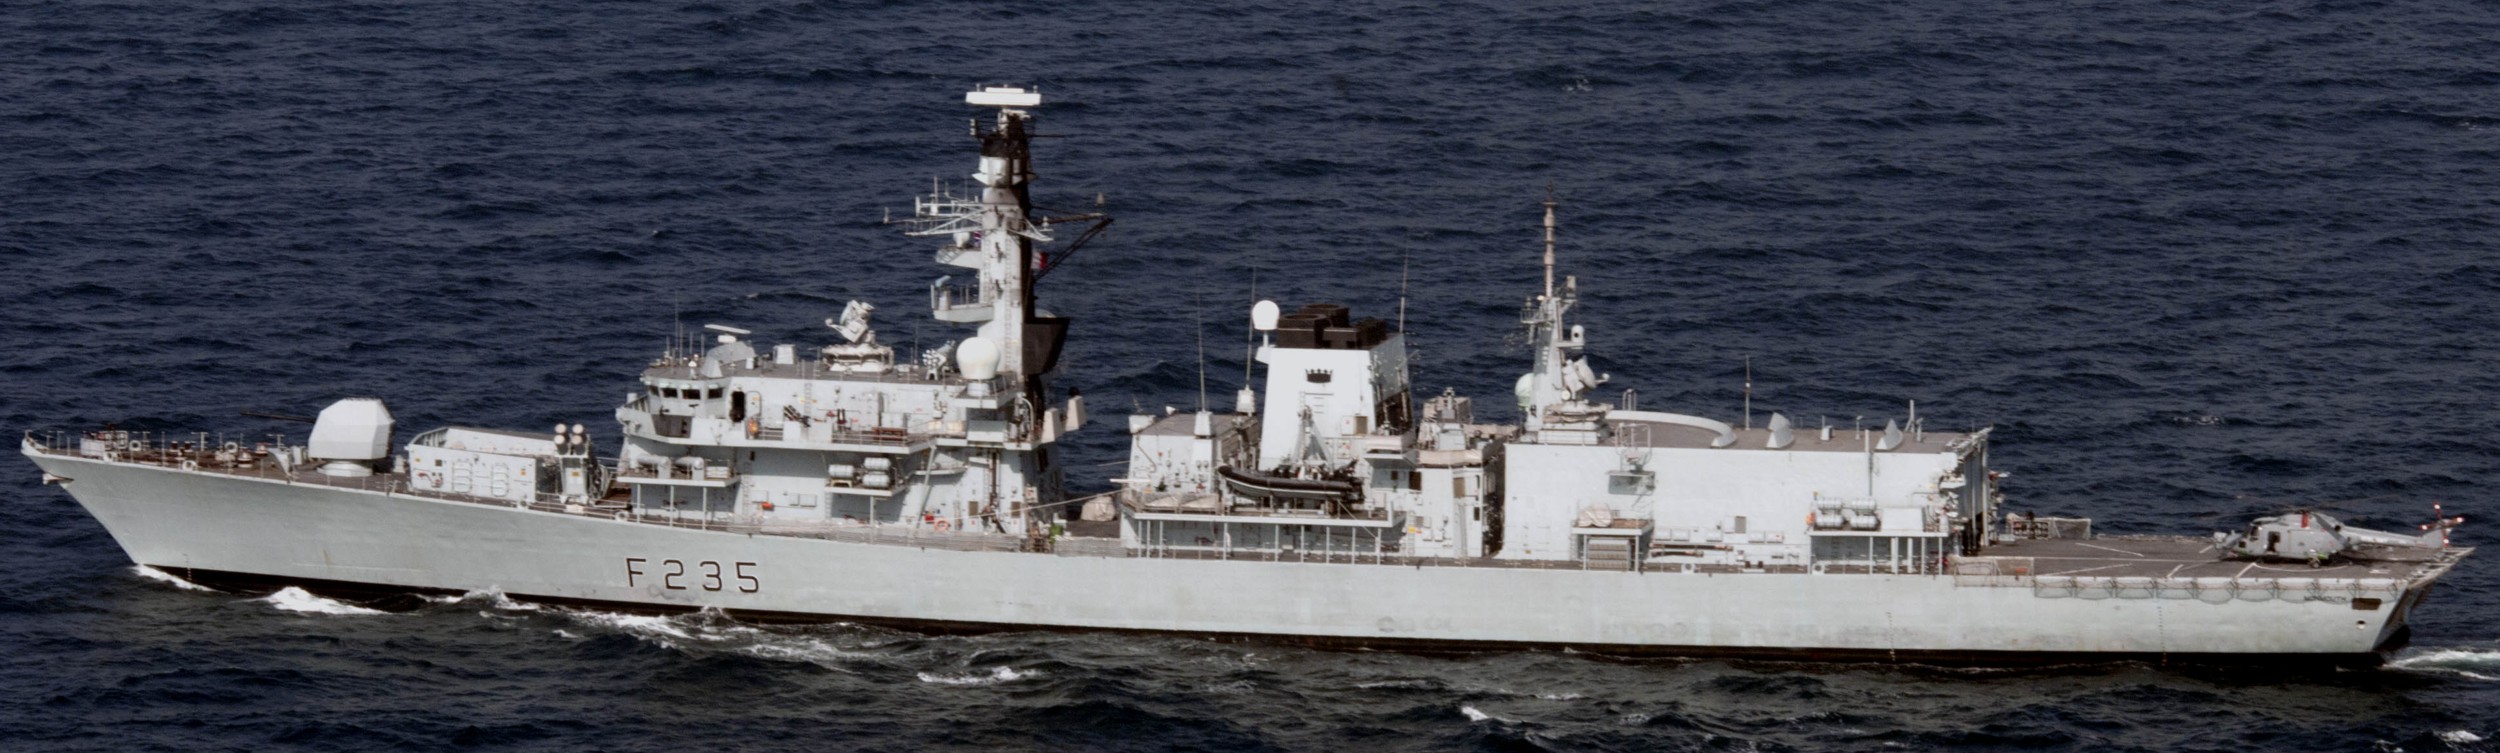 f-235 hms monmouth type 23 duke class guided missile frigate ffg royal navy 42 sea lynx helicopter